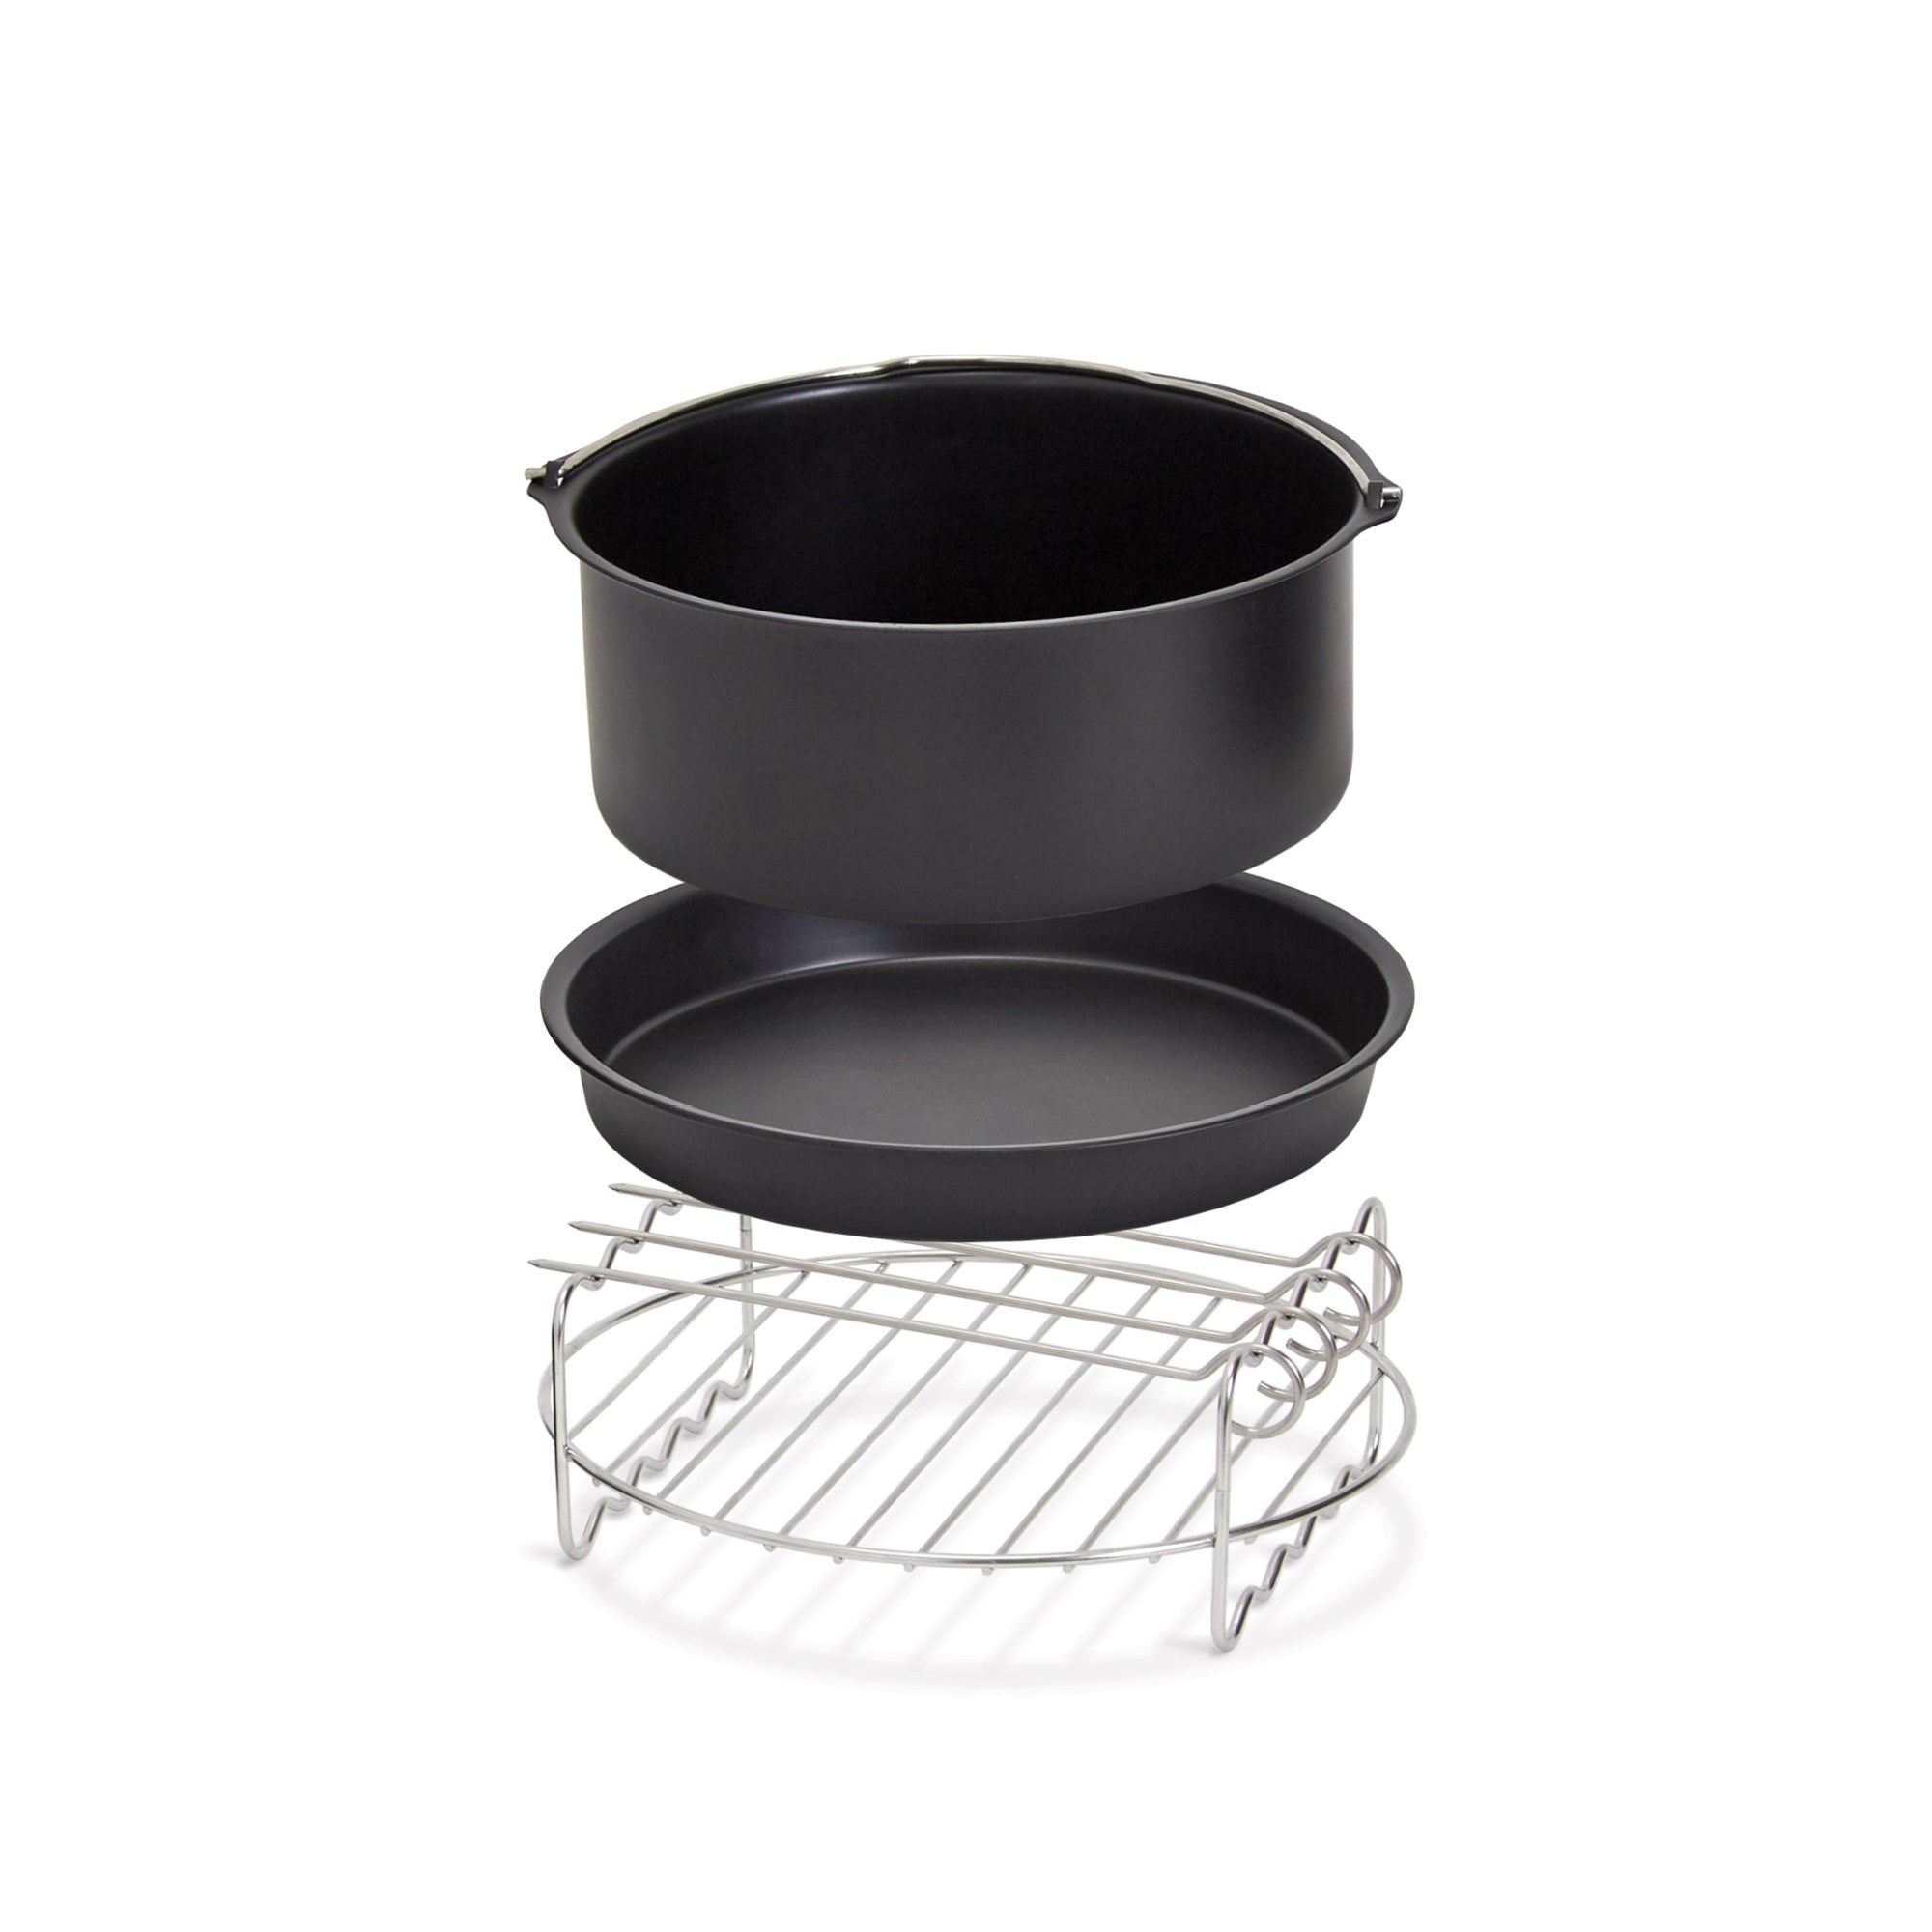 Kellmart Barbados - The perfect baking accessory is here! The Dash